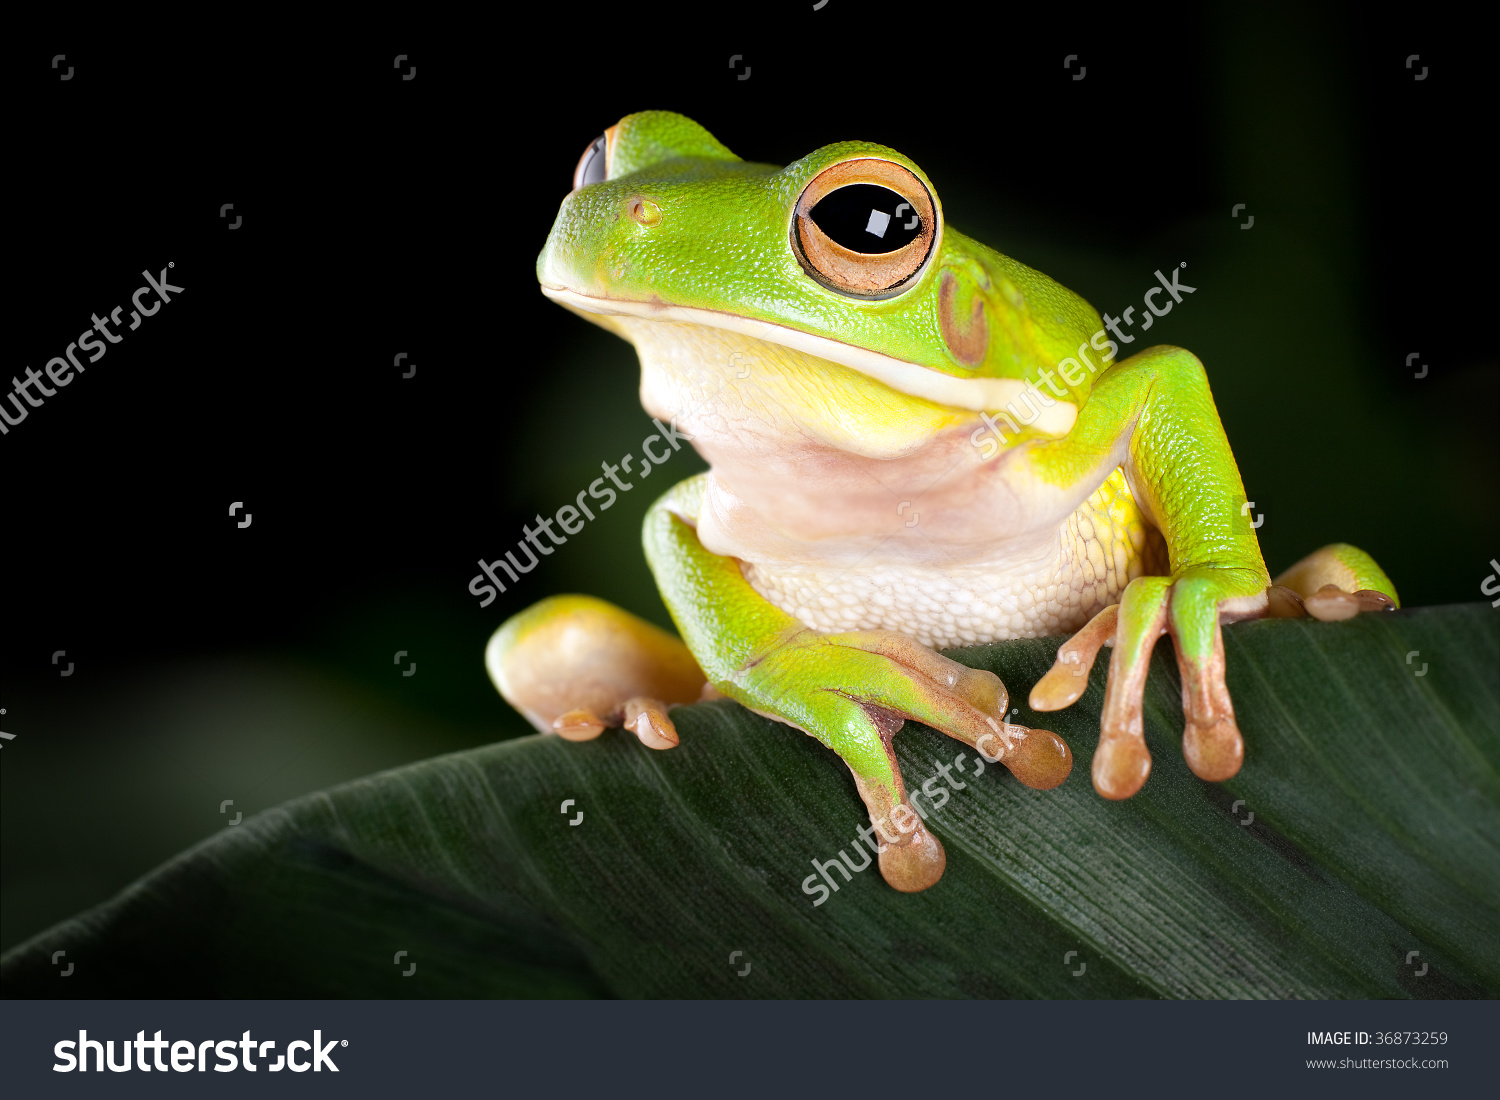 High Resolution Wallpaper | White-lipped Tree Frog 1500x1100 px